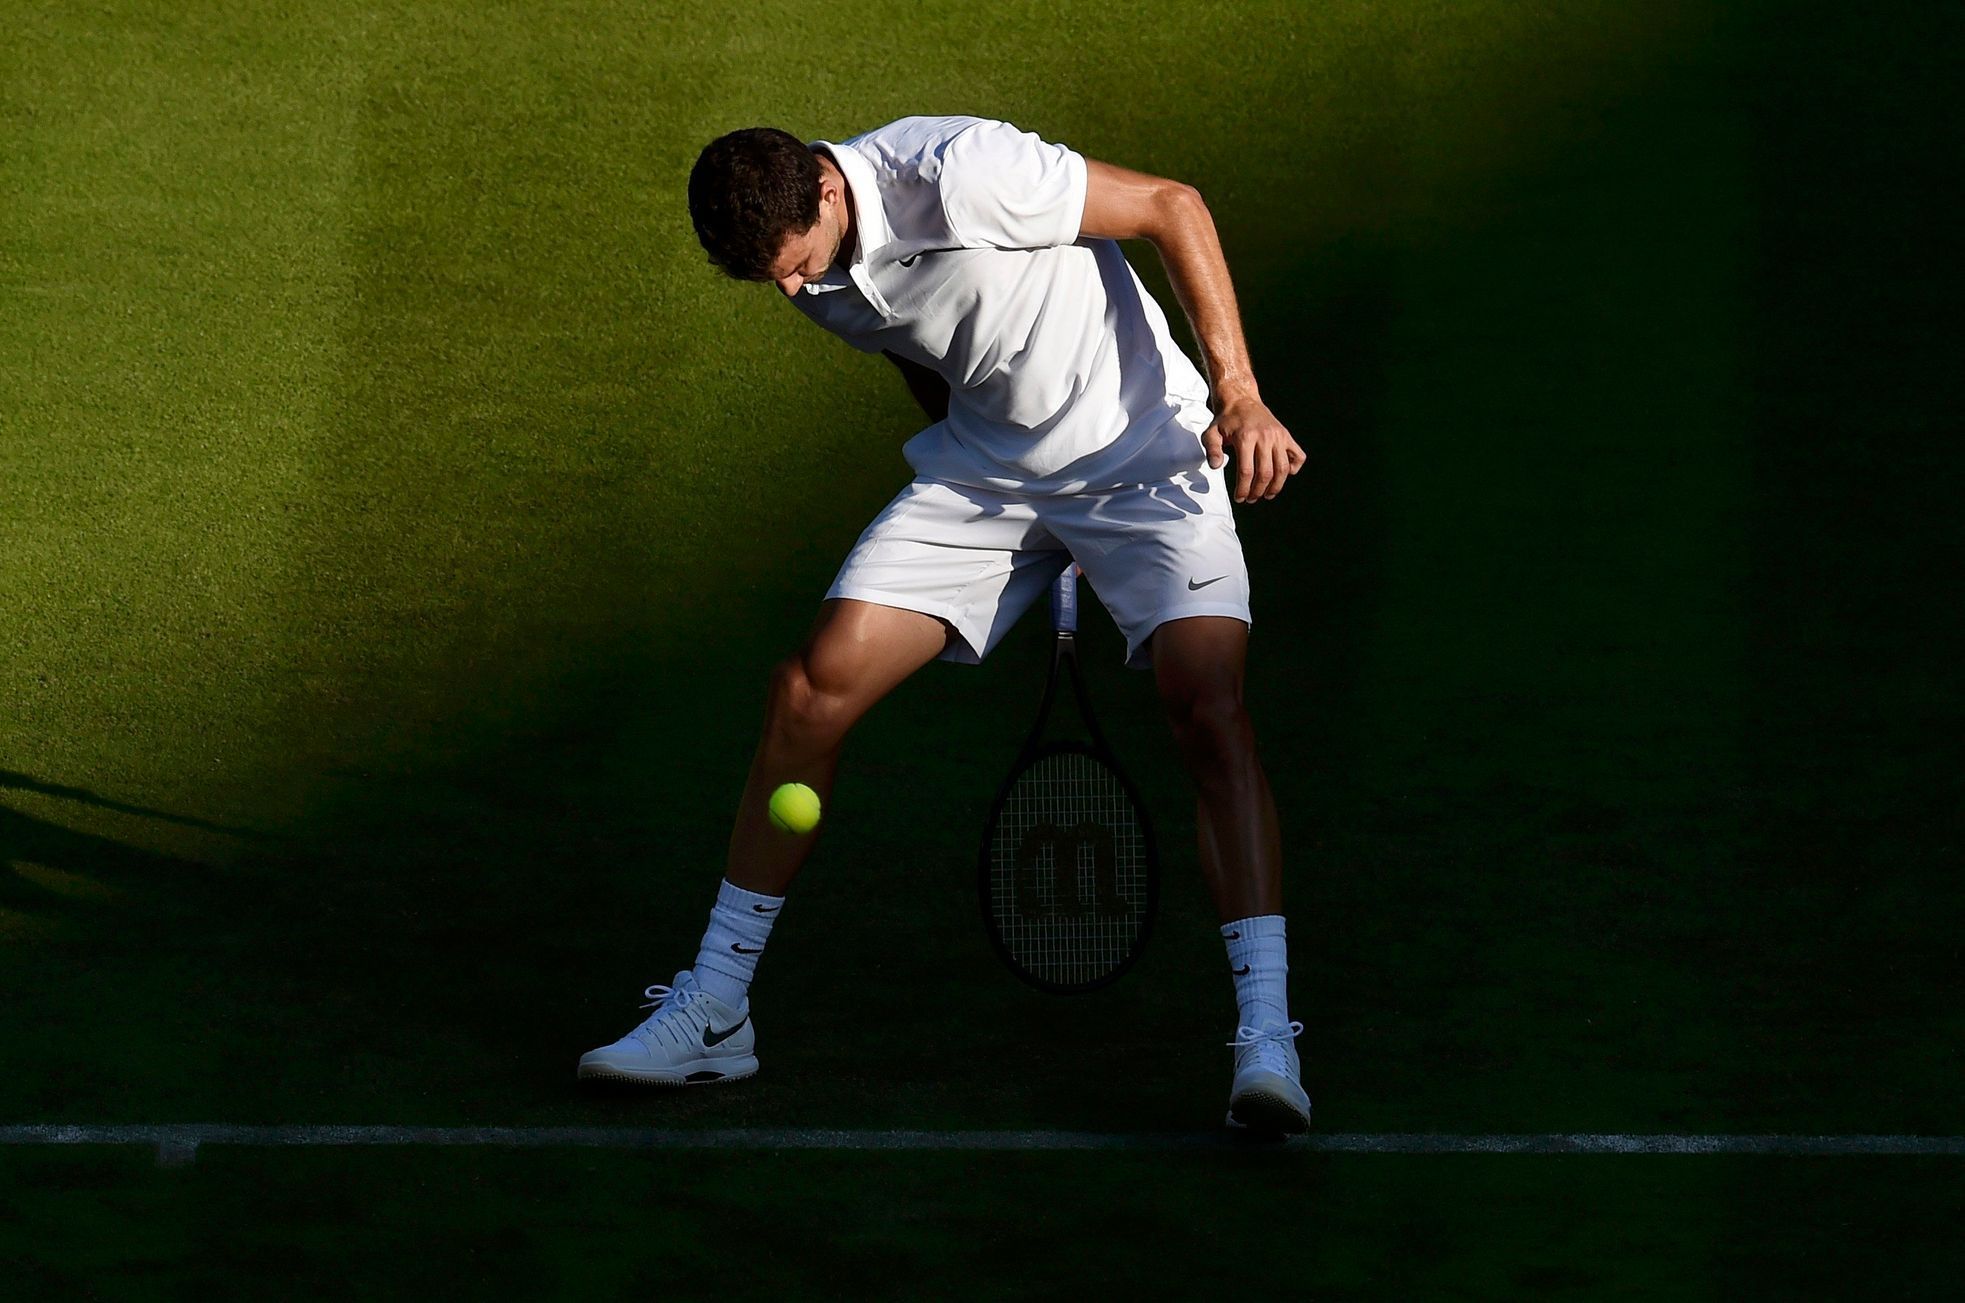 Grigor Dimitrov of Bulgaria plays a shot through his legs during his match against Federico Delbonis of Argentina at the Wimbledon Tennis Championships in London